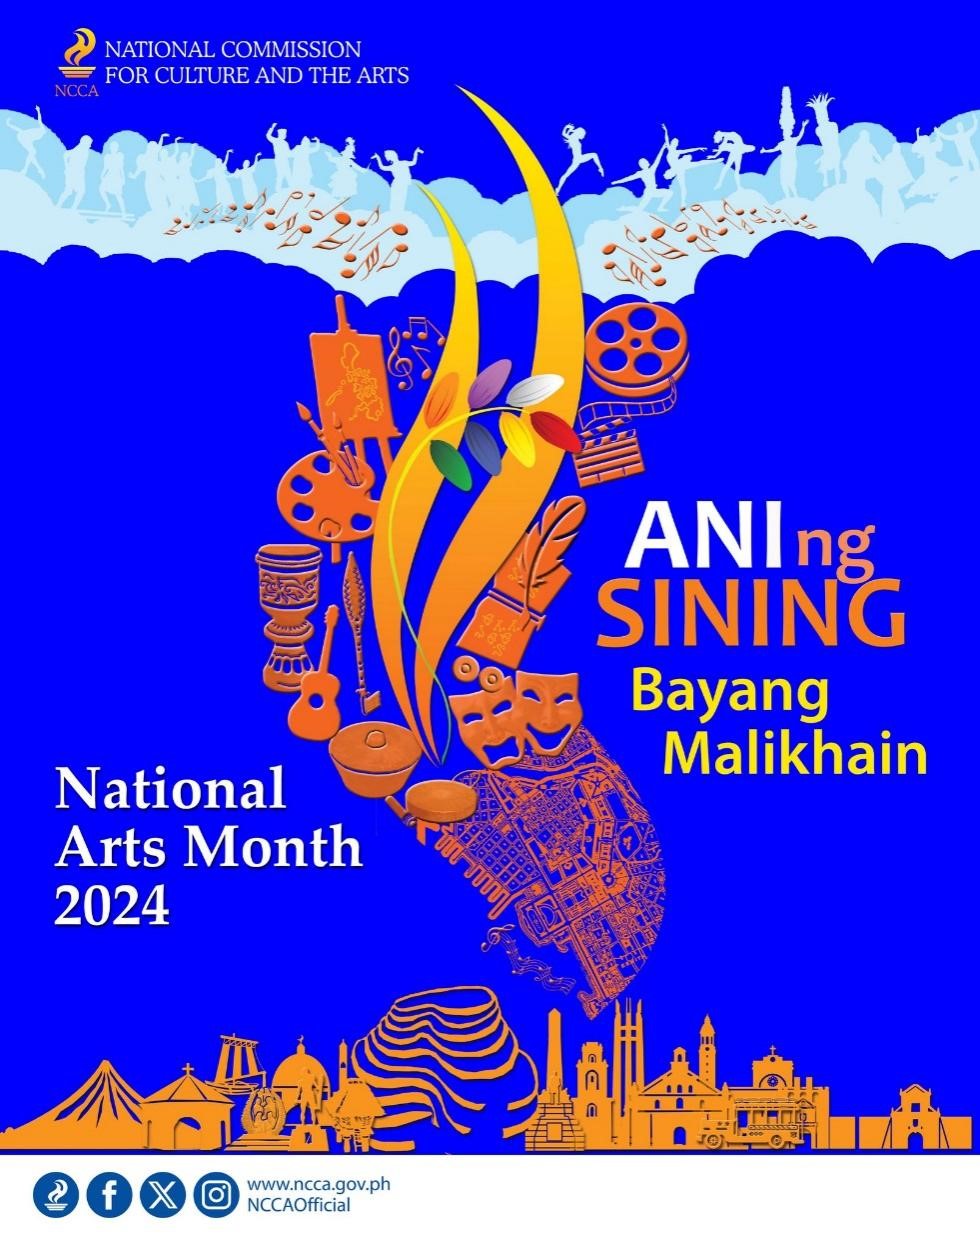 NATIONAL ARTS MONTH